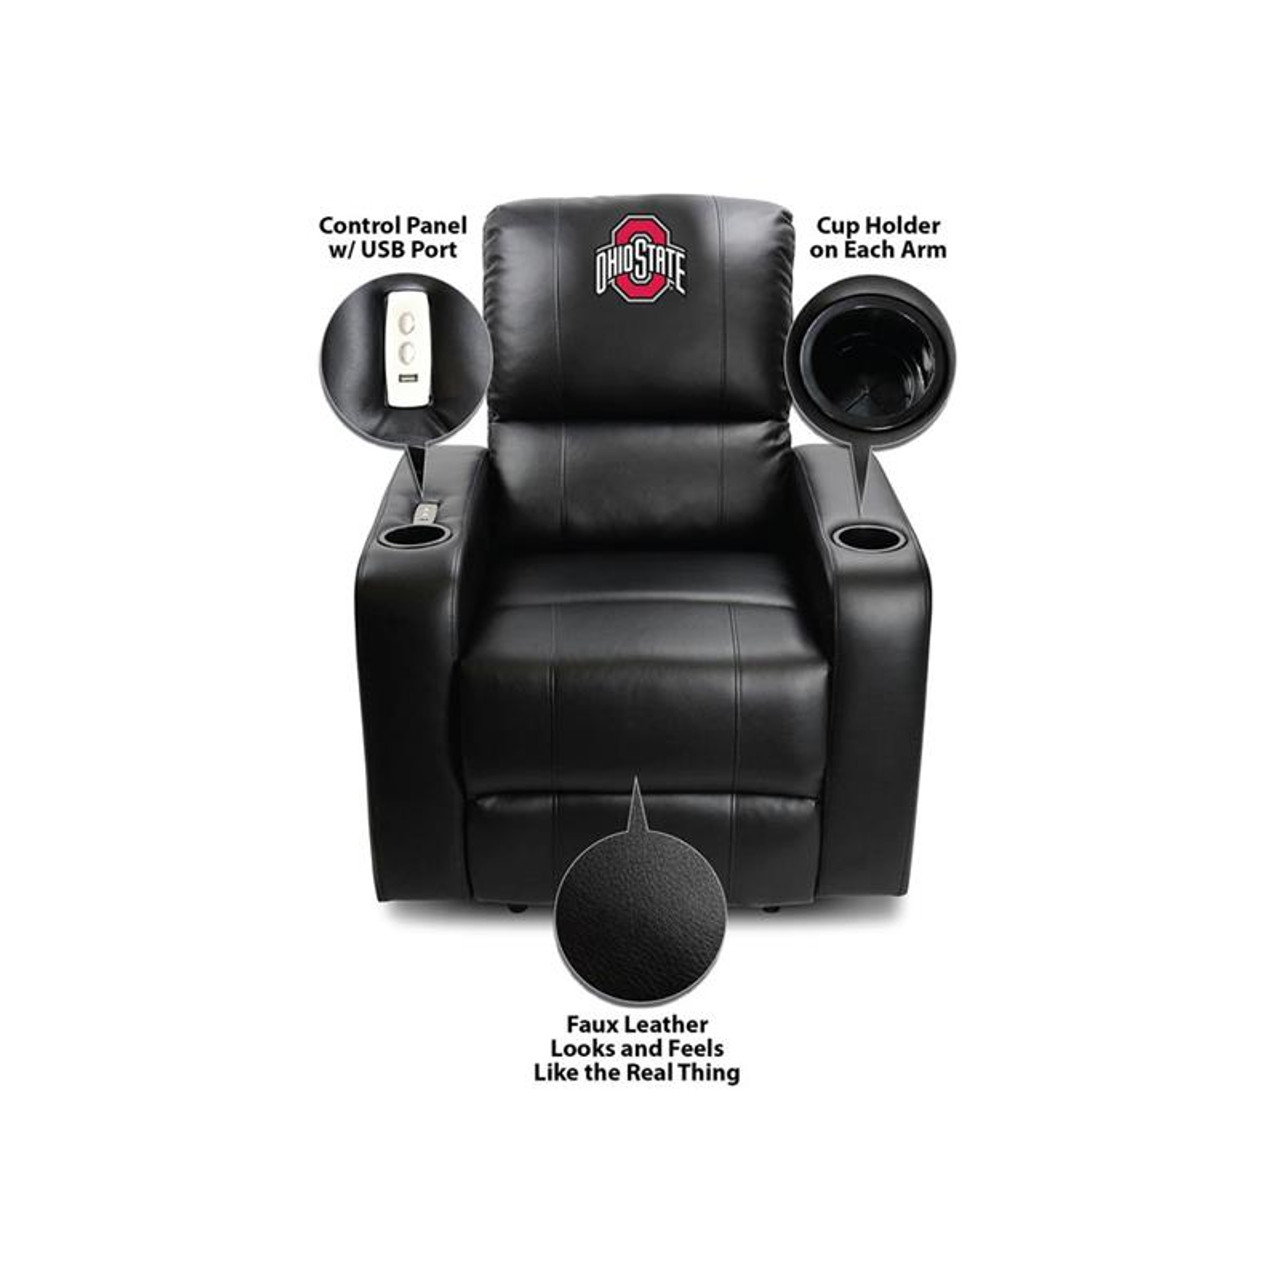 417-4001, Boston, Bruins, BOS, OS, Power, Theater, Seating,  Recliner, USB, Port, FREE SHIPPING, NHL, Imperial, 720801174013